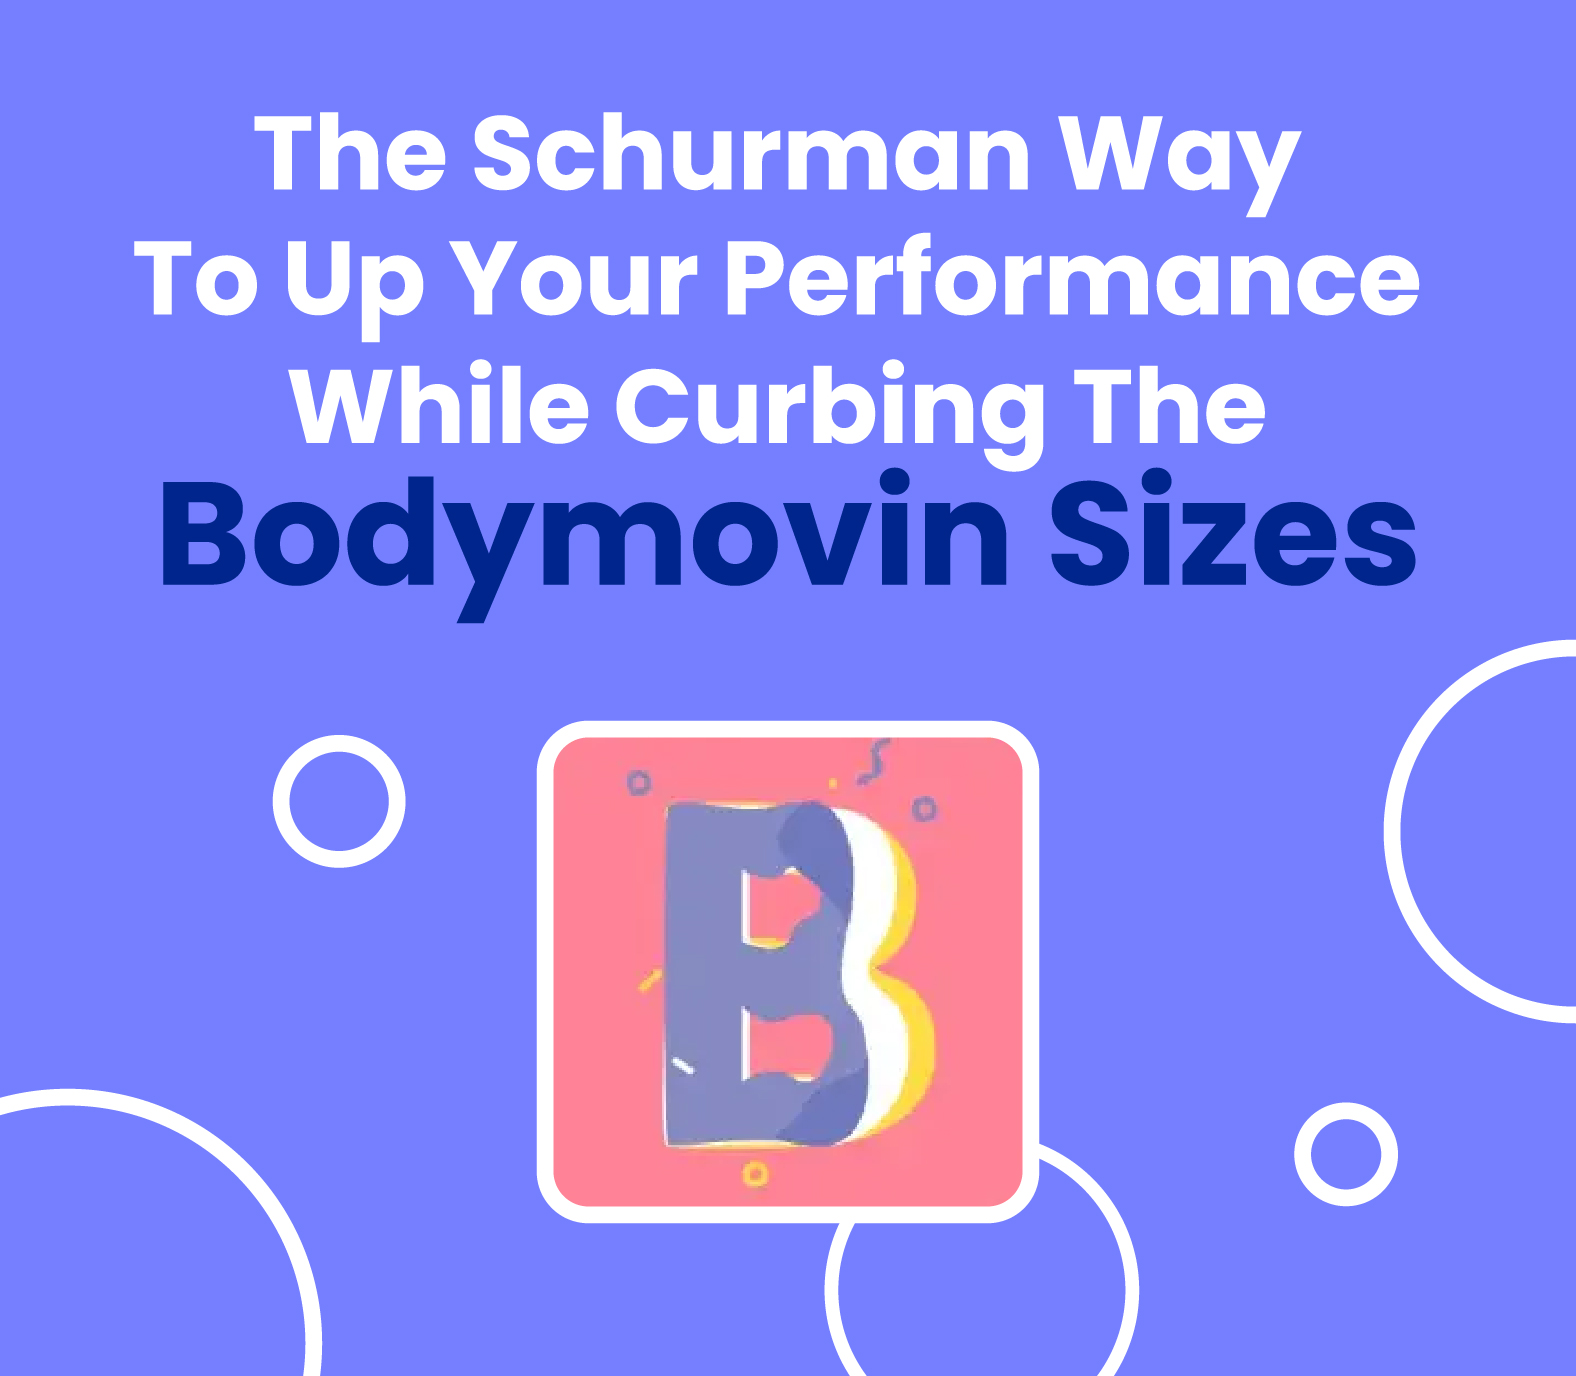 The Schurman Way To Up Your Performance While Curbing The Bodymovin Sizes